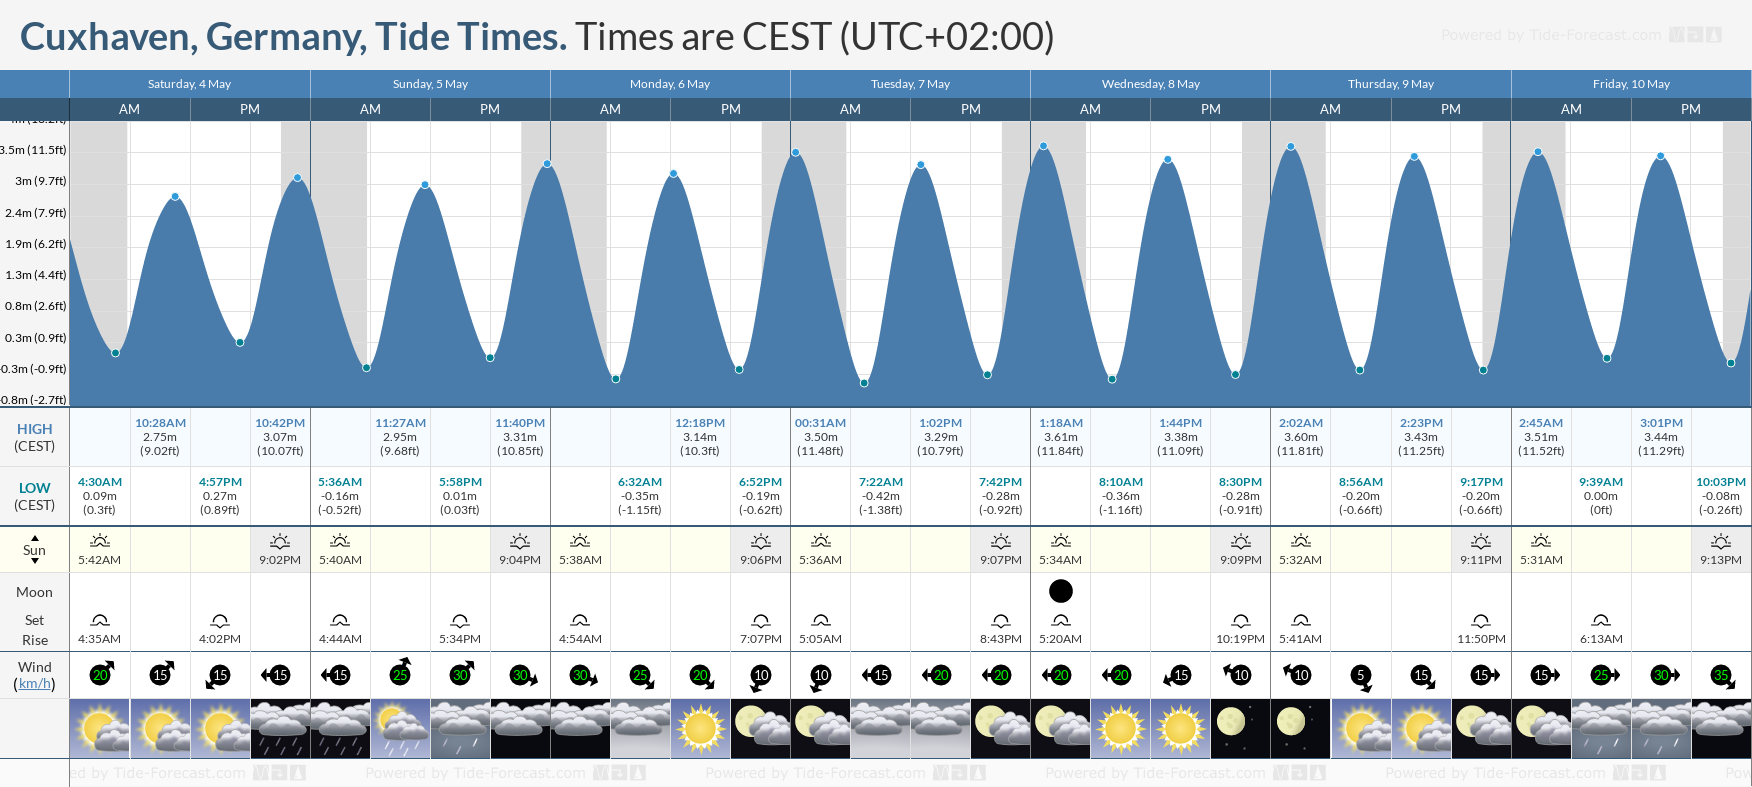 Cuxhaven, Germany Tide Chart including high and low tide tide times for the next 7 days